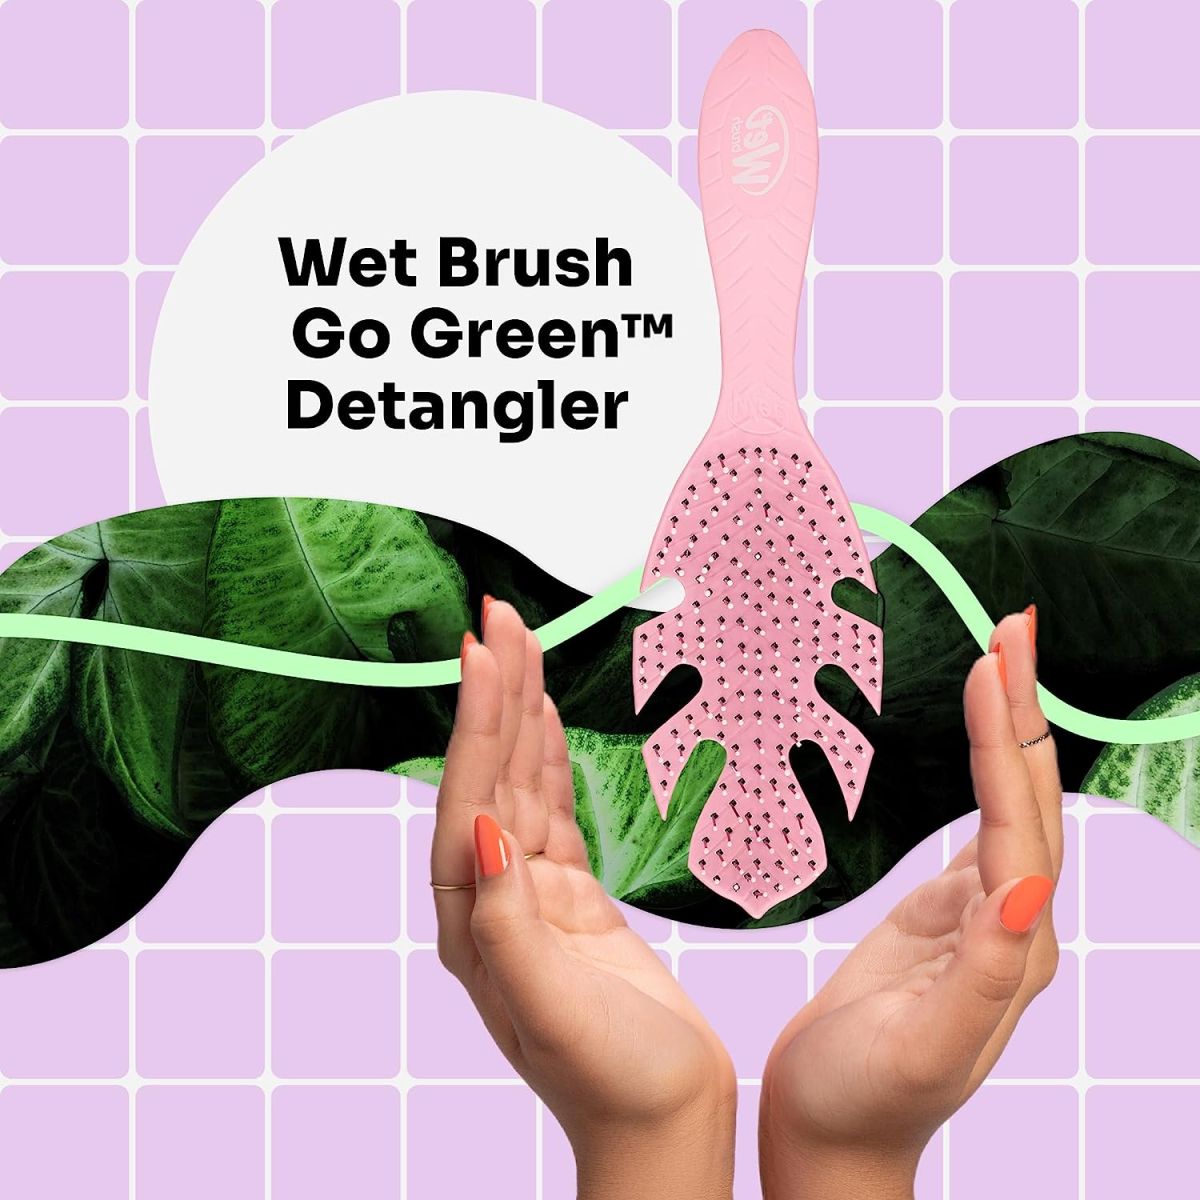 Wet Brush Go Green Hair Detangler Brush - Pale Pink - Exclusive Ultra-Soft IntelliFlex Bristles Glide Through Tangles with Ease for All Hair Types - No Split Ends and Pain-Free for Wet or Dry Hair